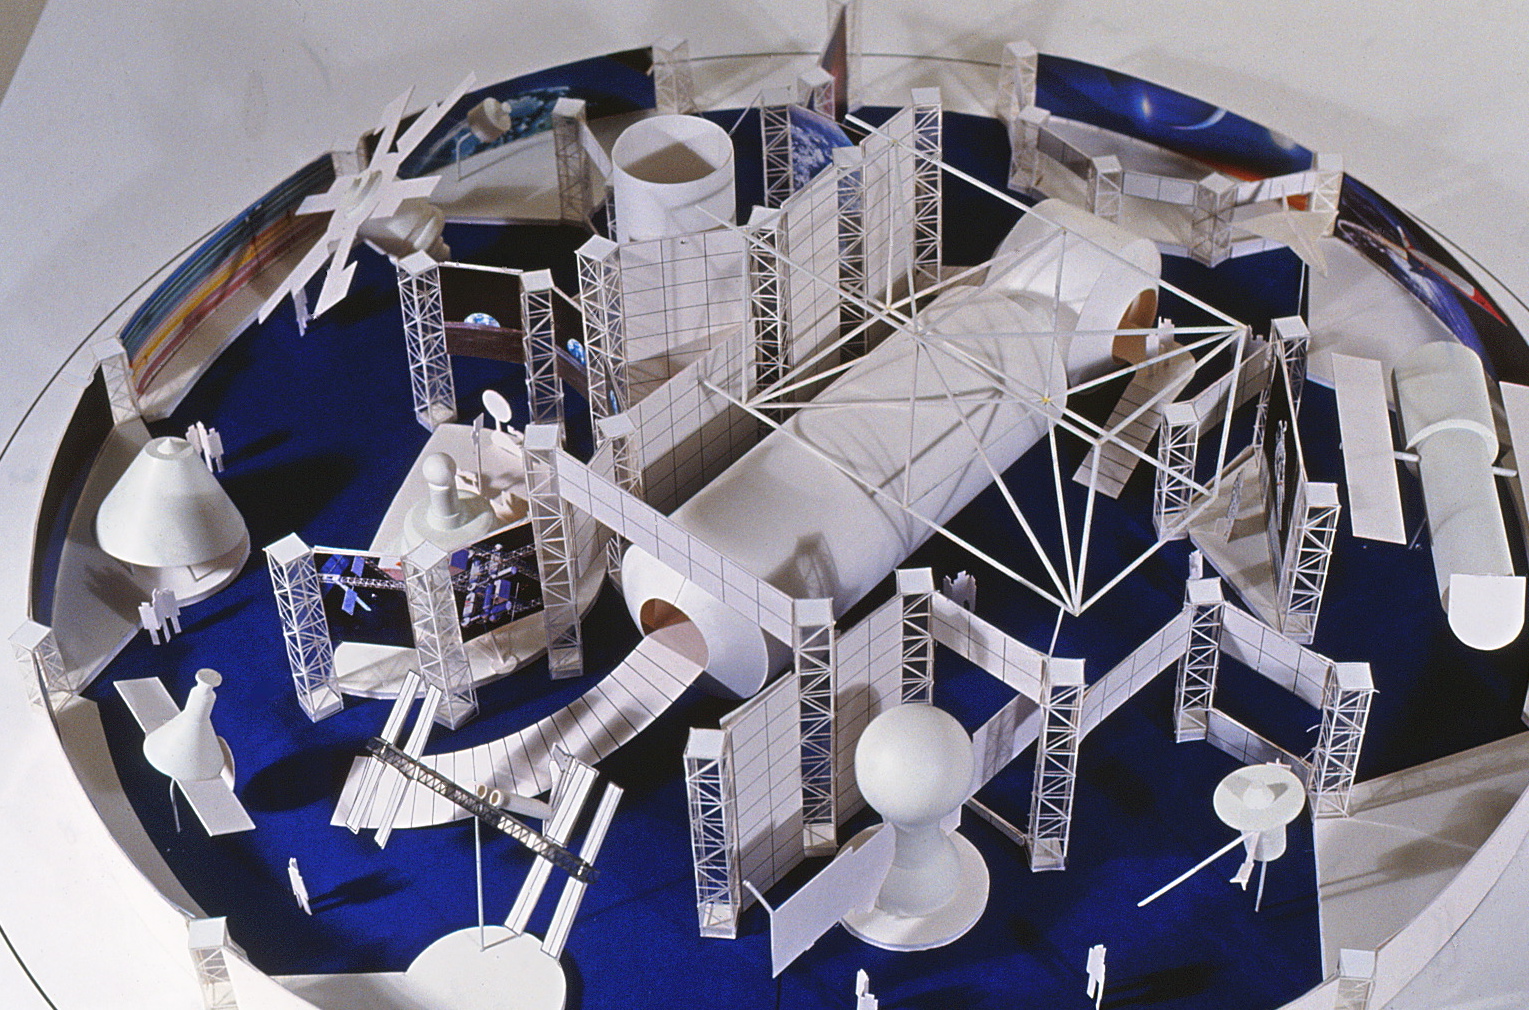 Photo of the exhibit model with no dome over it, taken from above, featuring the entrance side of the complex.